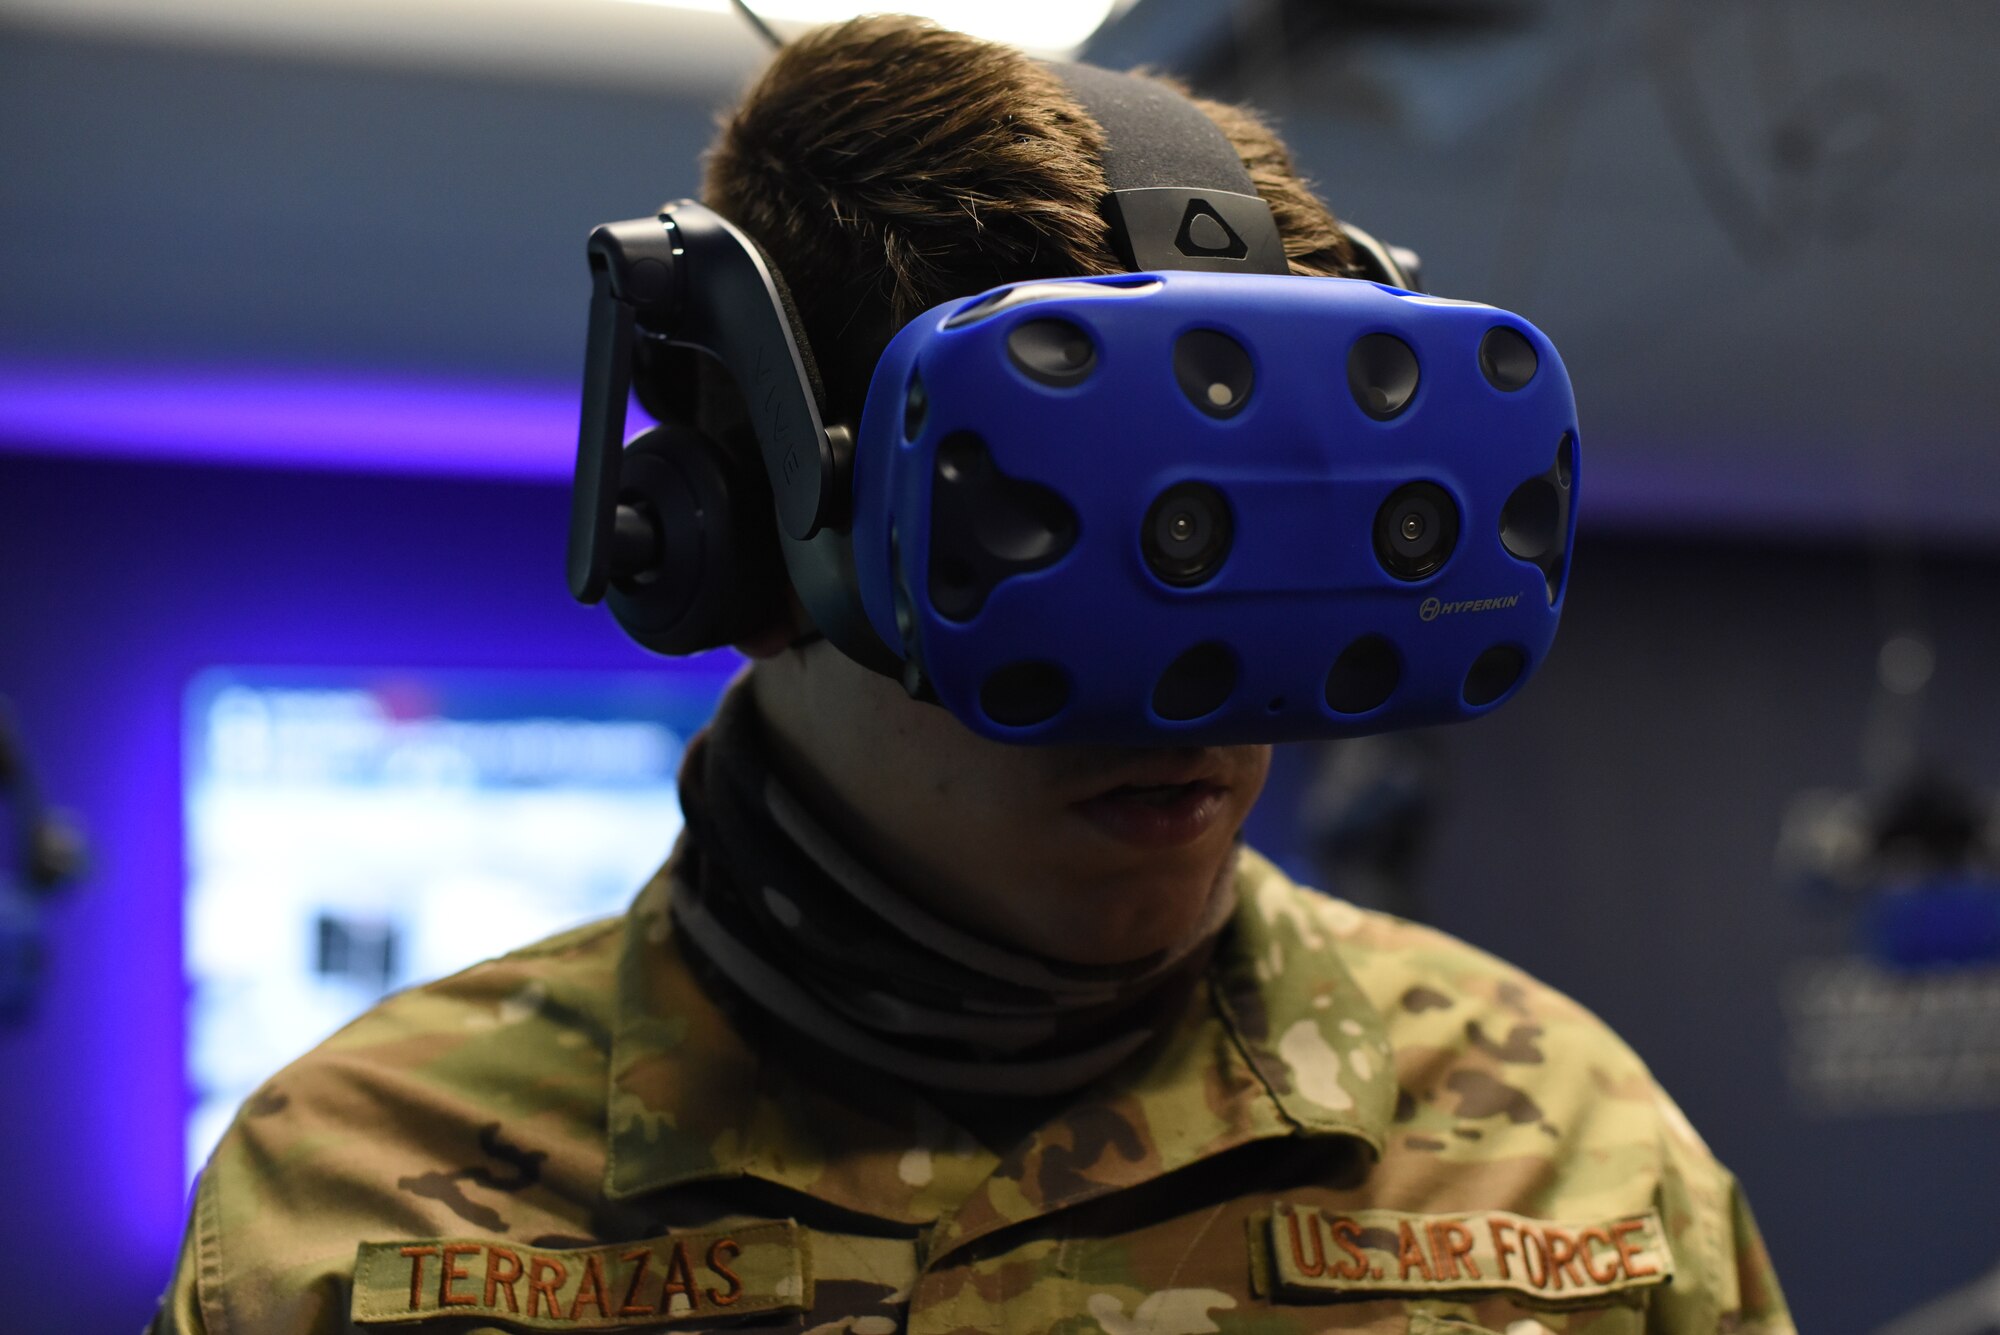 C-130 crew chief uses virtual reality headset to conduct training